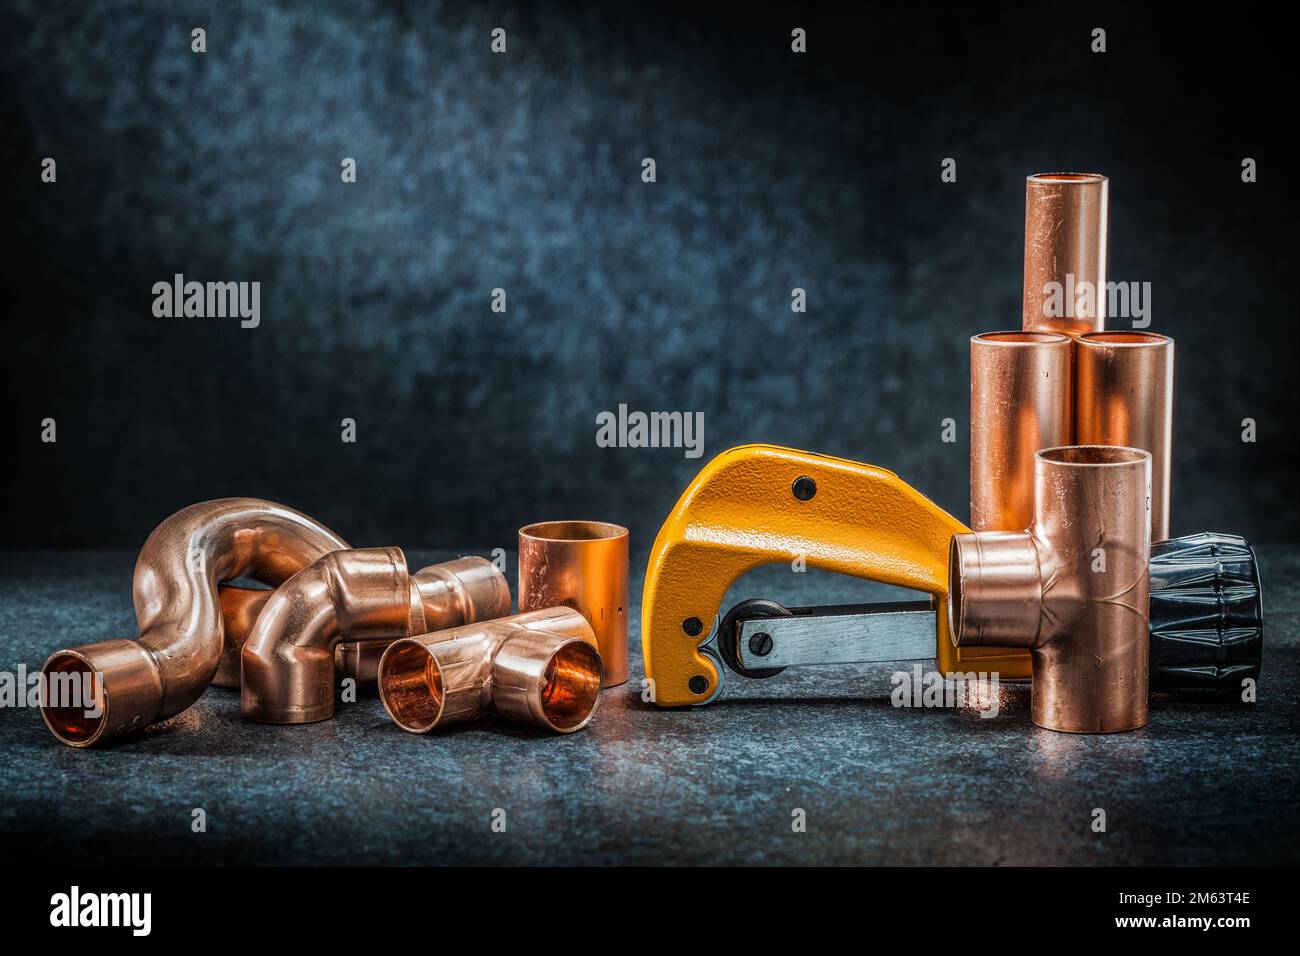 yellow pipe cutter and copper pipe with connectors on dark background Stock Photo